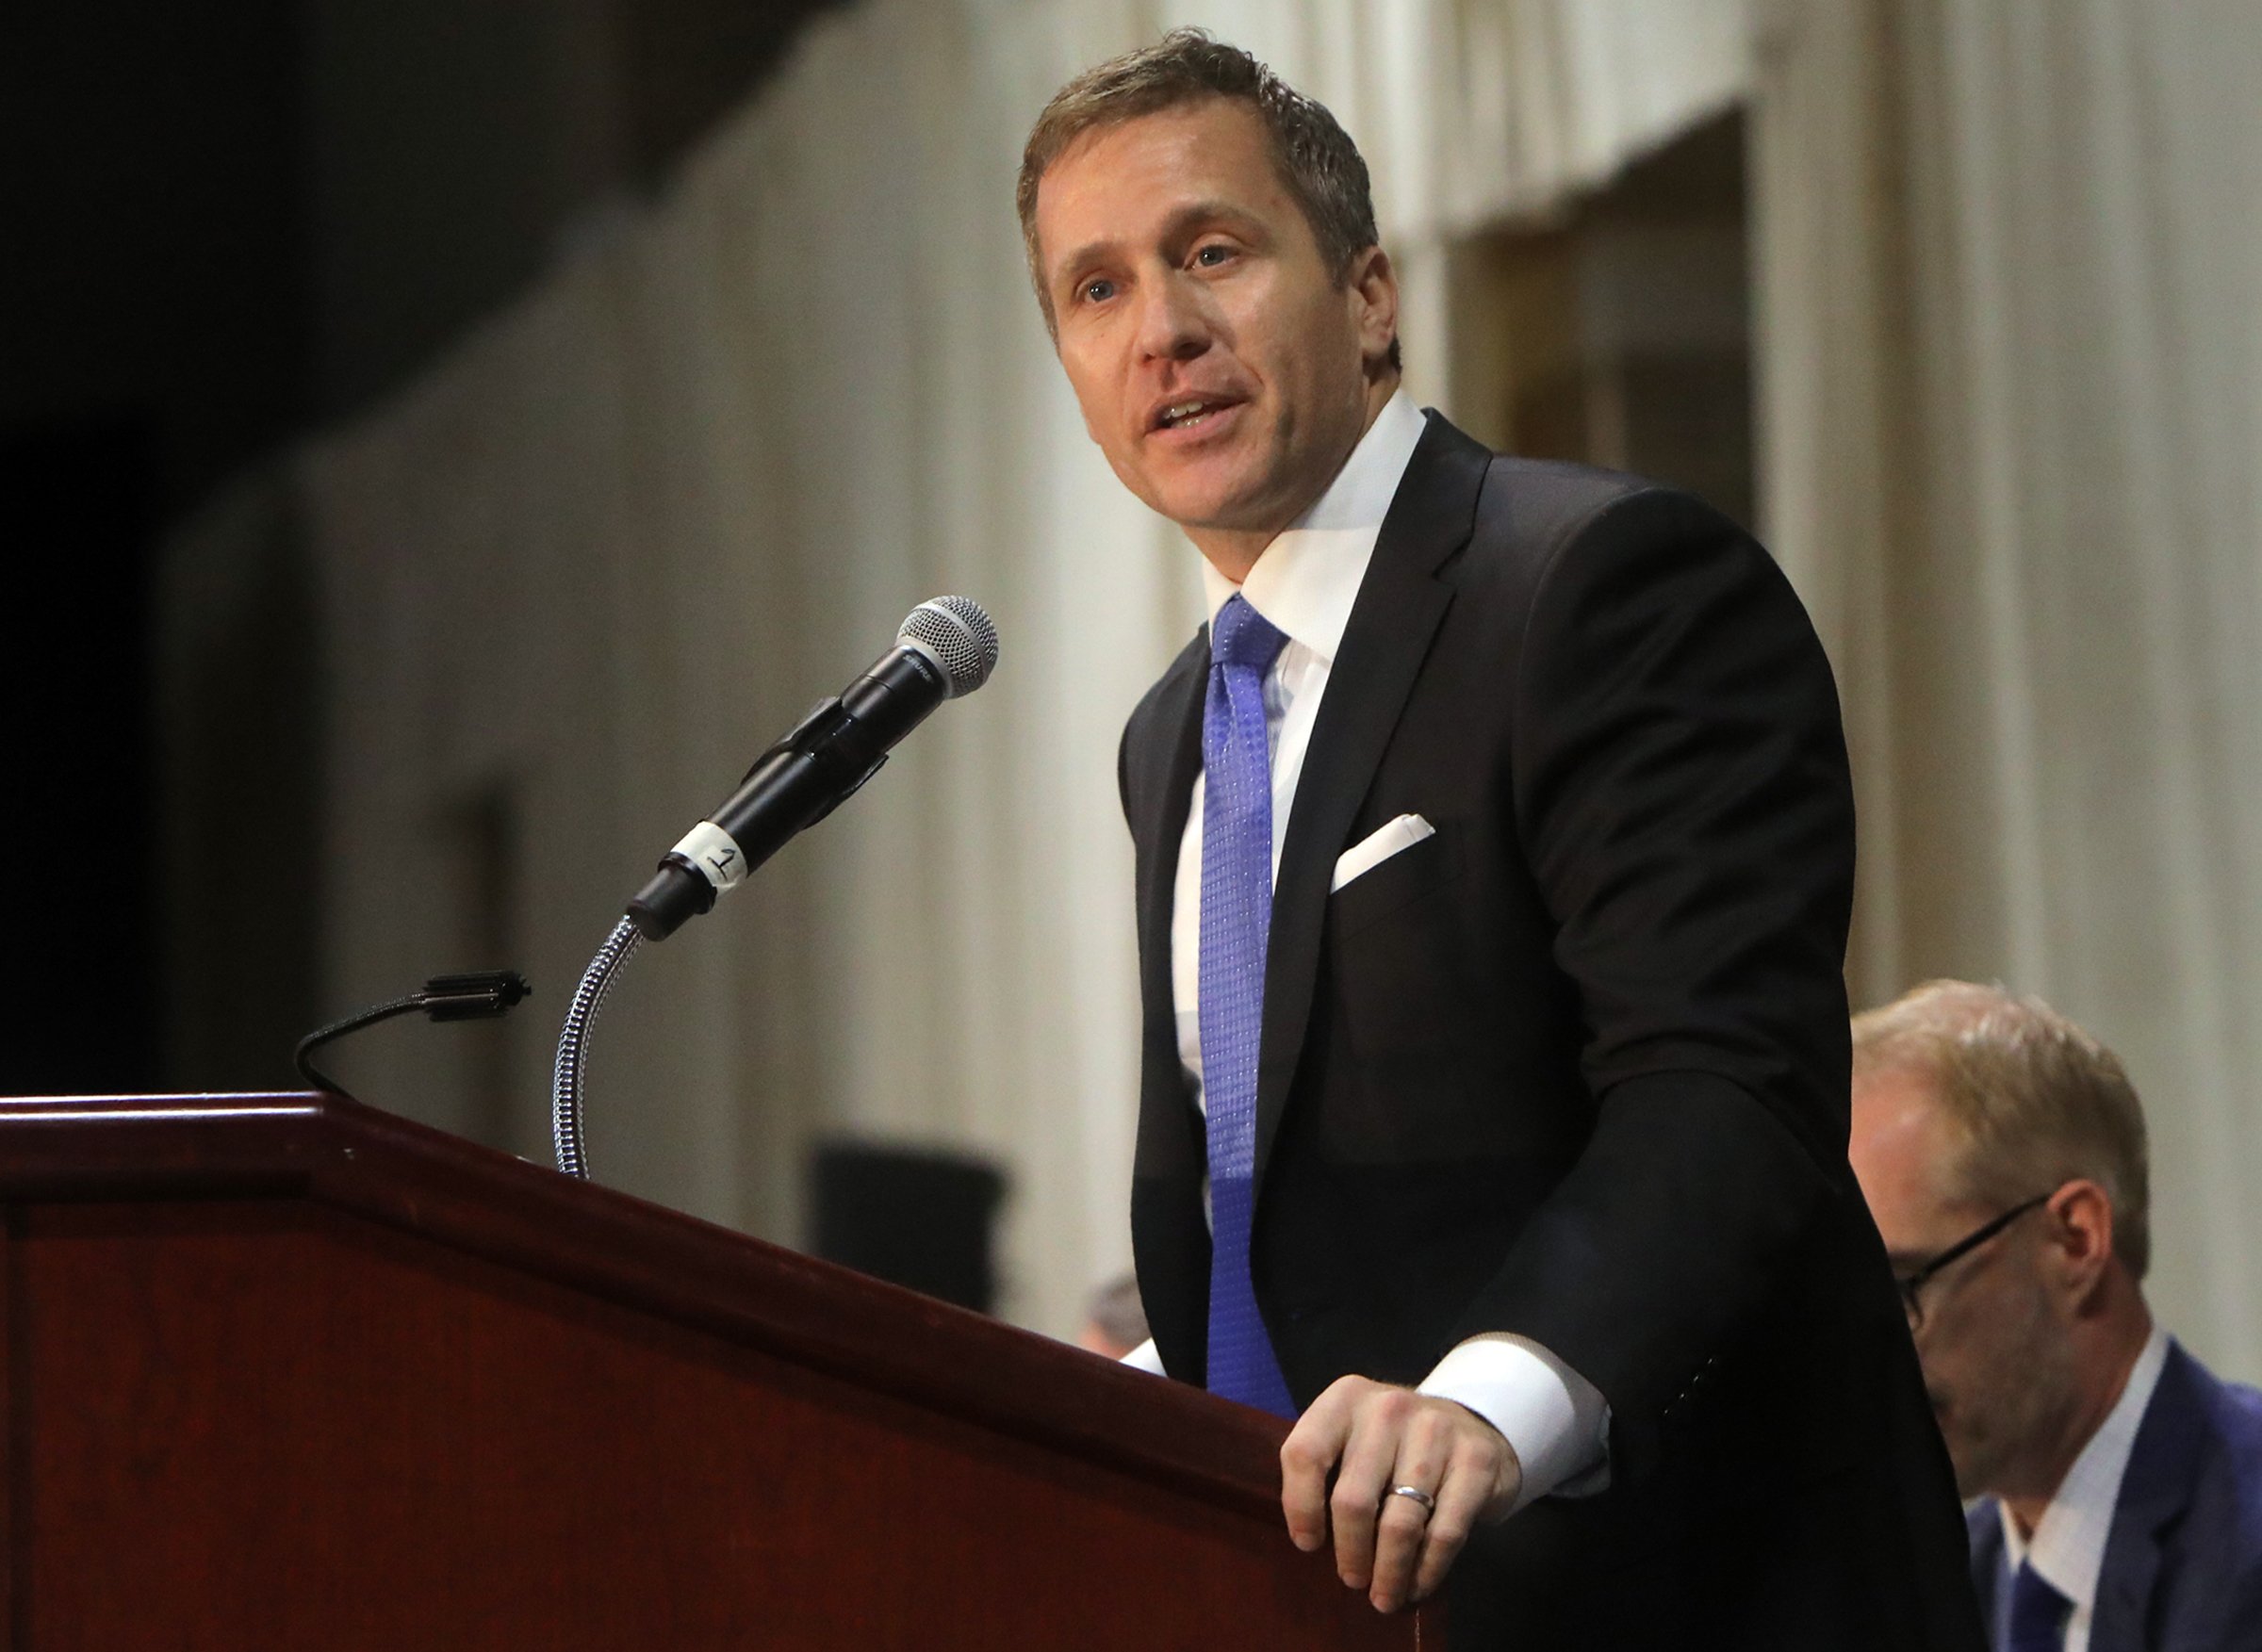 Gov. Eric Greitens delivers the keynote address at the 27th Annual Police Officer Memorial Prayer Breakfast in St. Louis, Missouri on on April 25, 2018. (Laurie Skrivan—St. Louis Post-Dispatch/Getty Images)